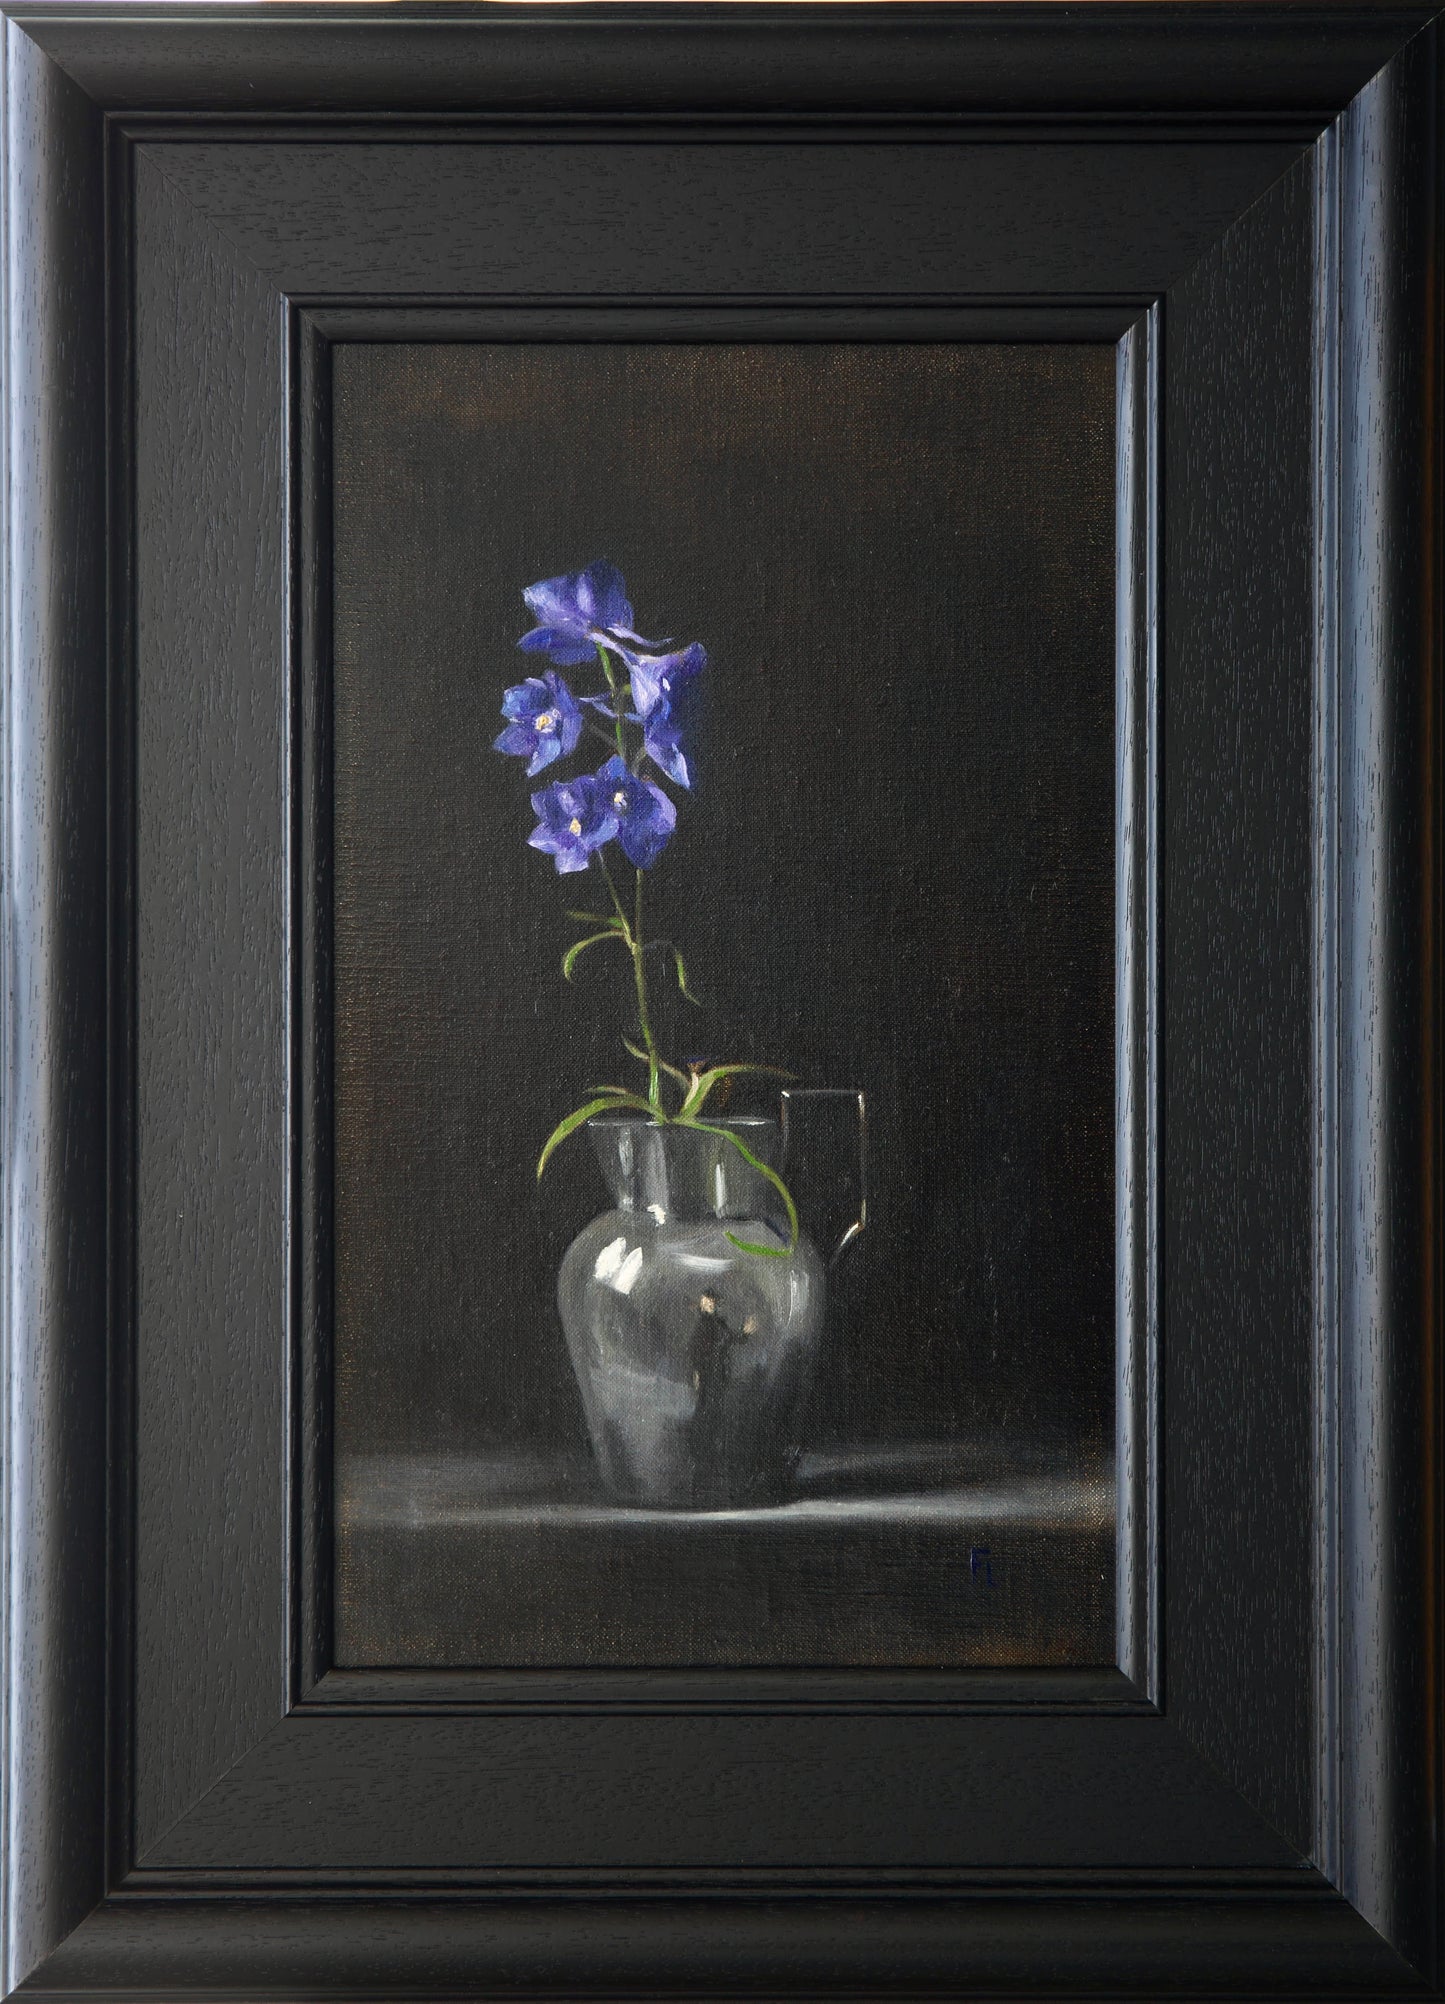 'Delphiniums in Vase with Artist Reflection' - Available Exclusively at Fotheringham Gallery